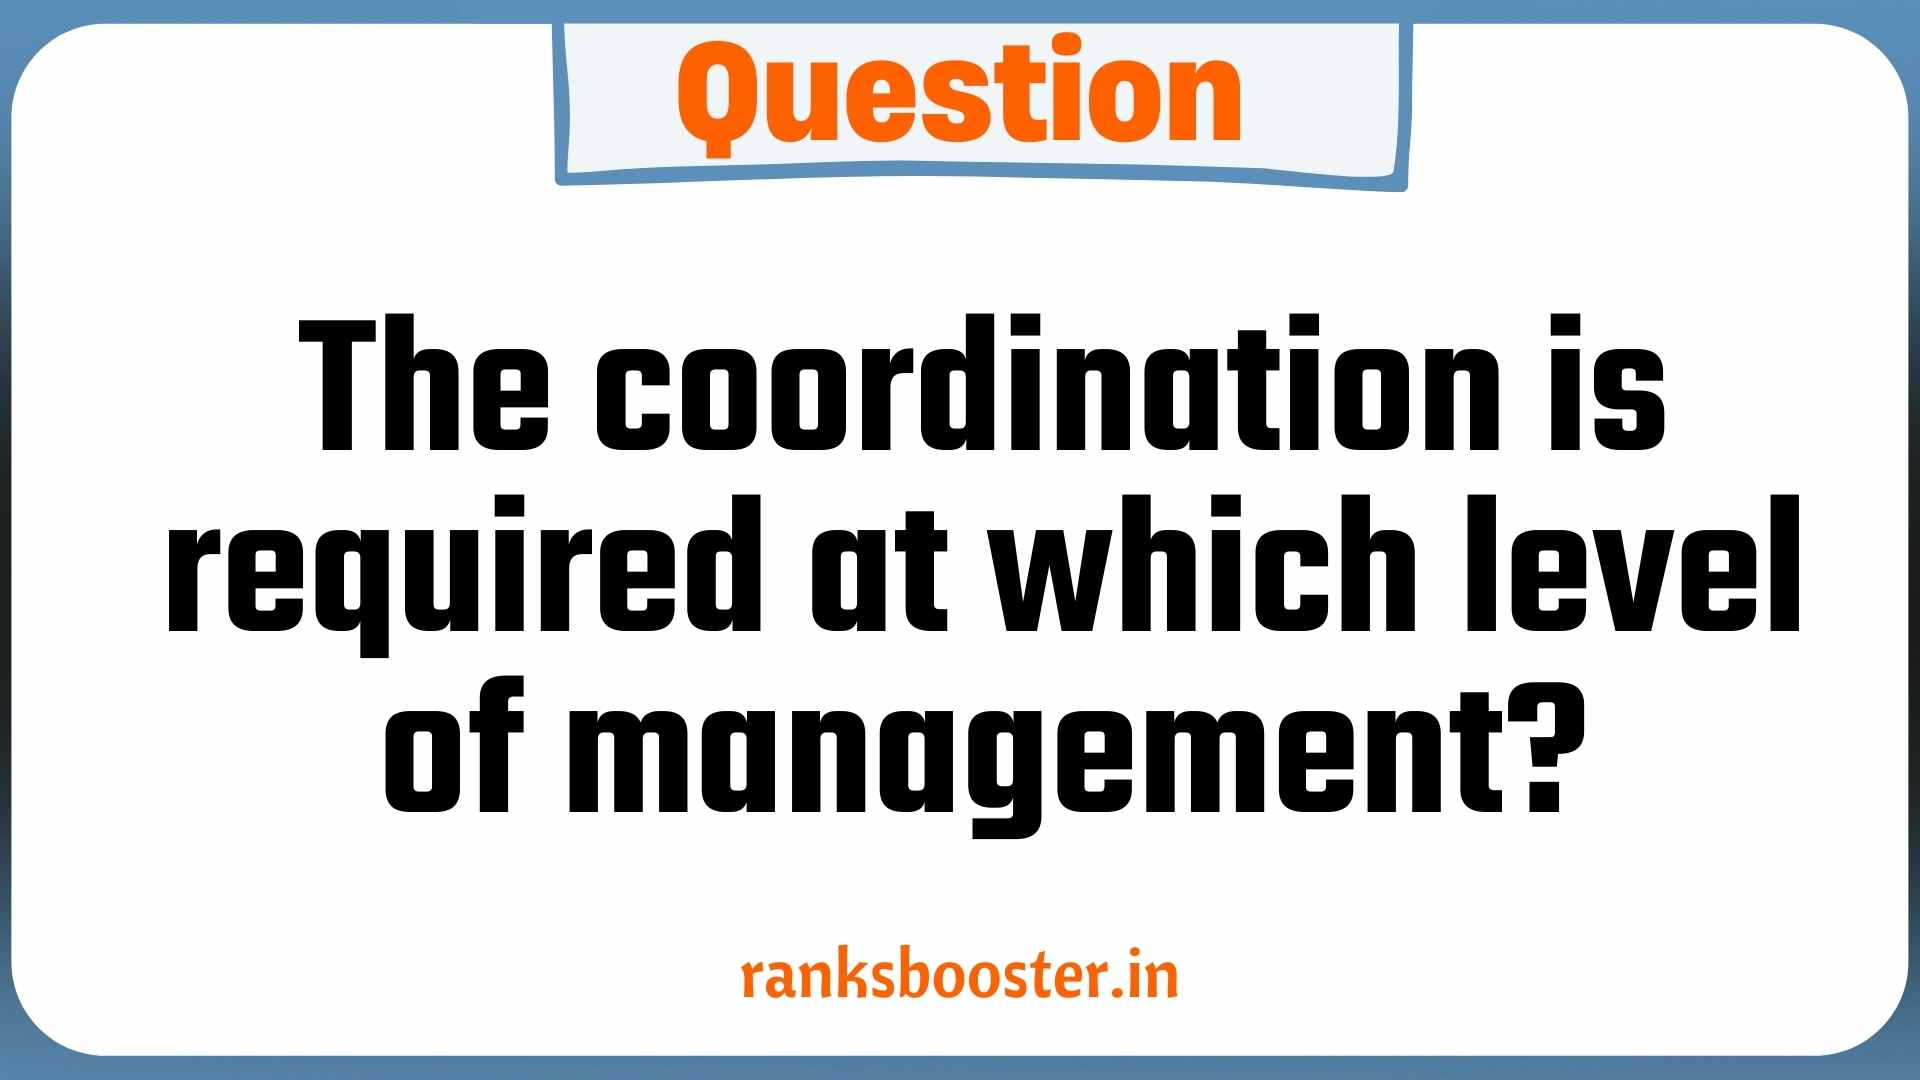 Question: The coordination is required at which level of management?